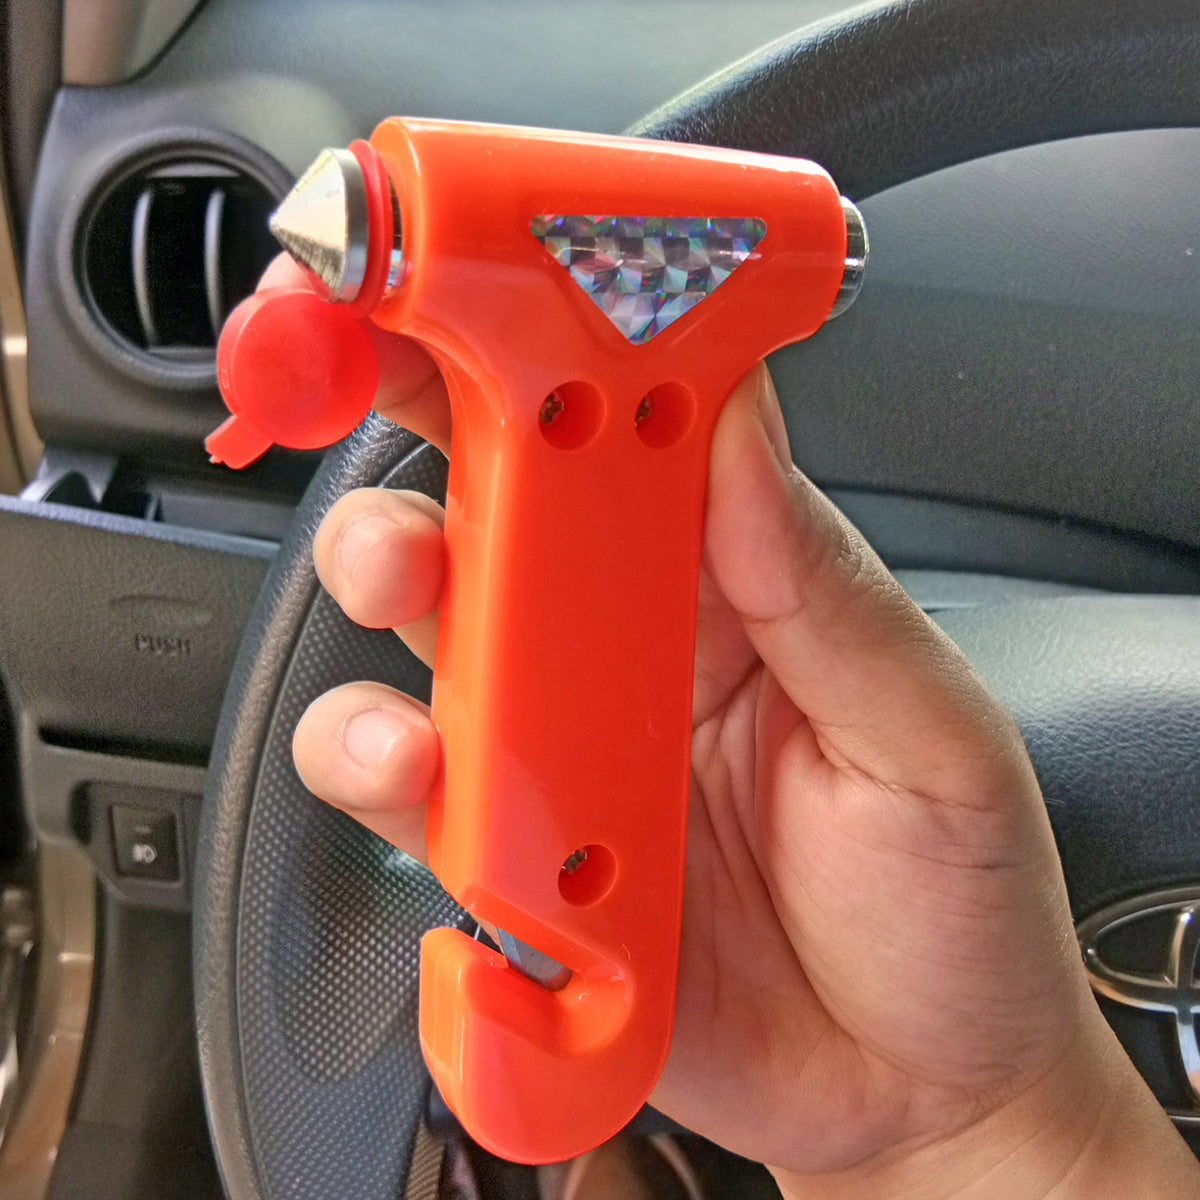 A car escape tool that breaks windows works on tempered glass only